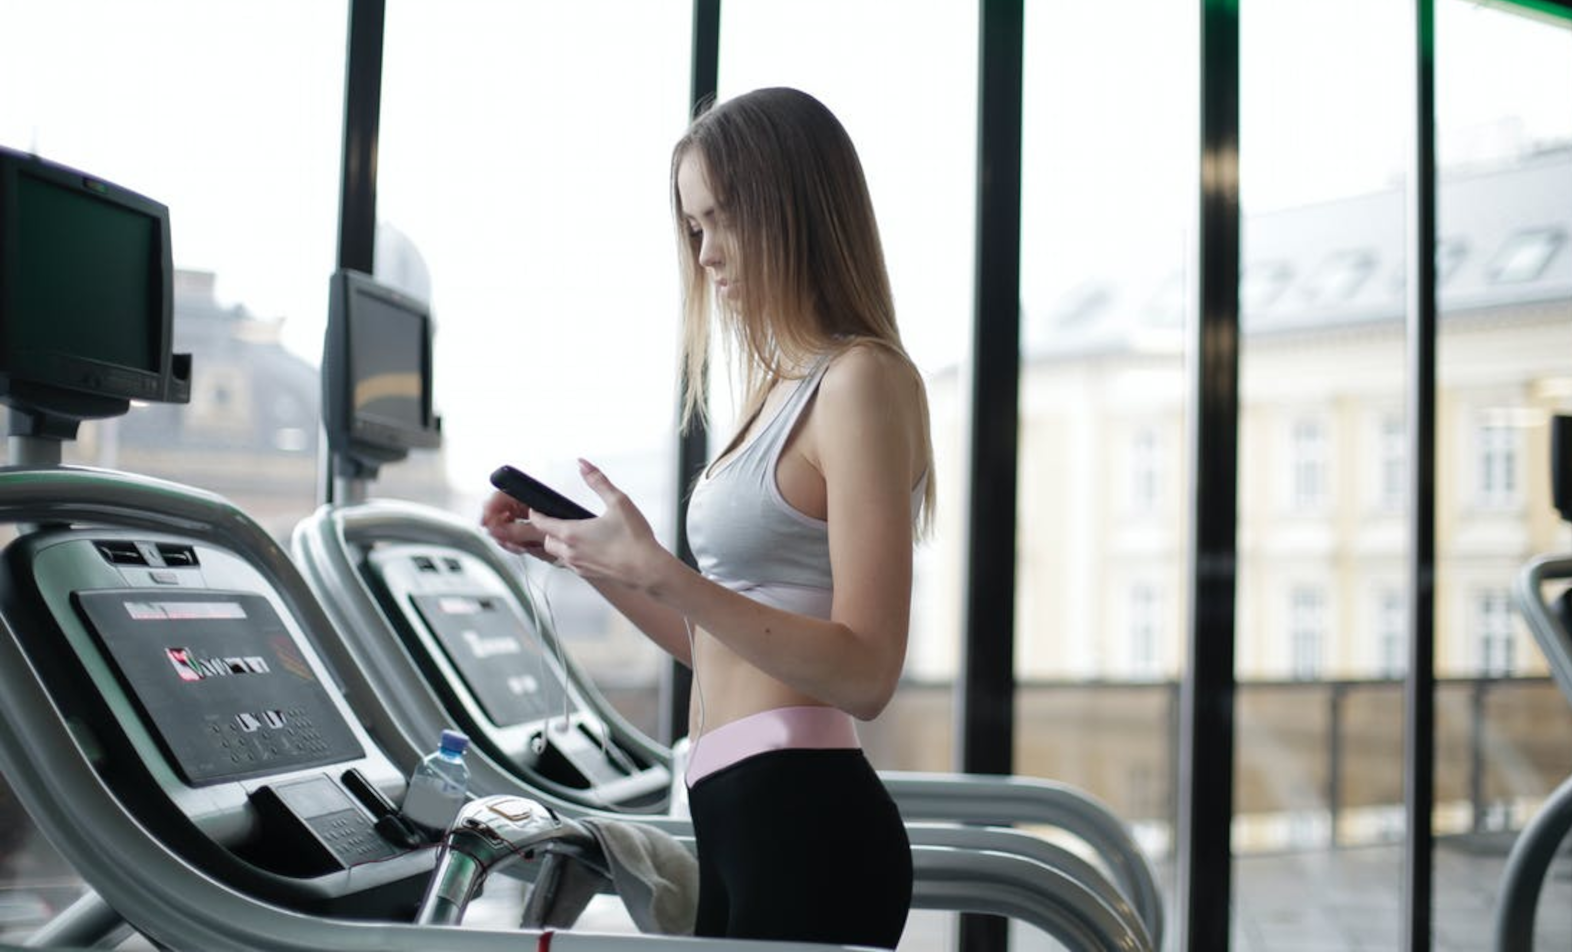 GETM Virtual Fitness Session - Girl on the treadmill on video call